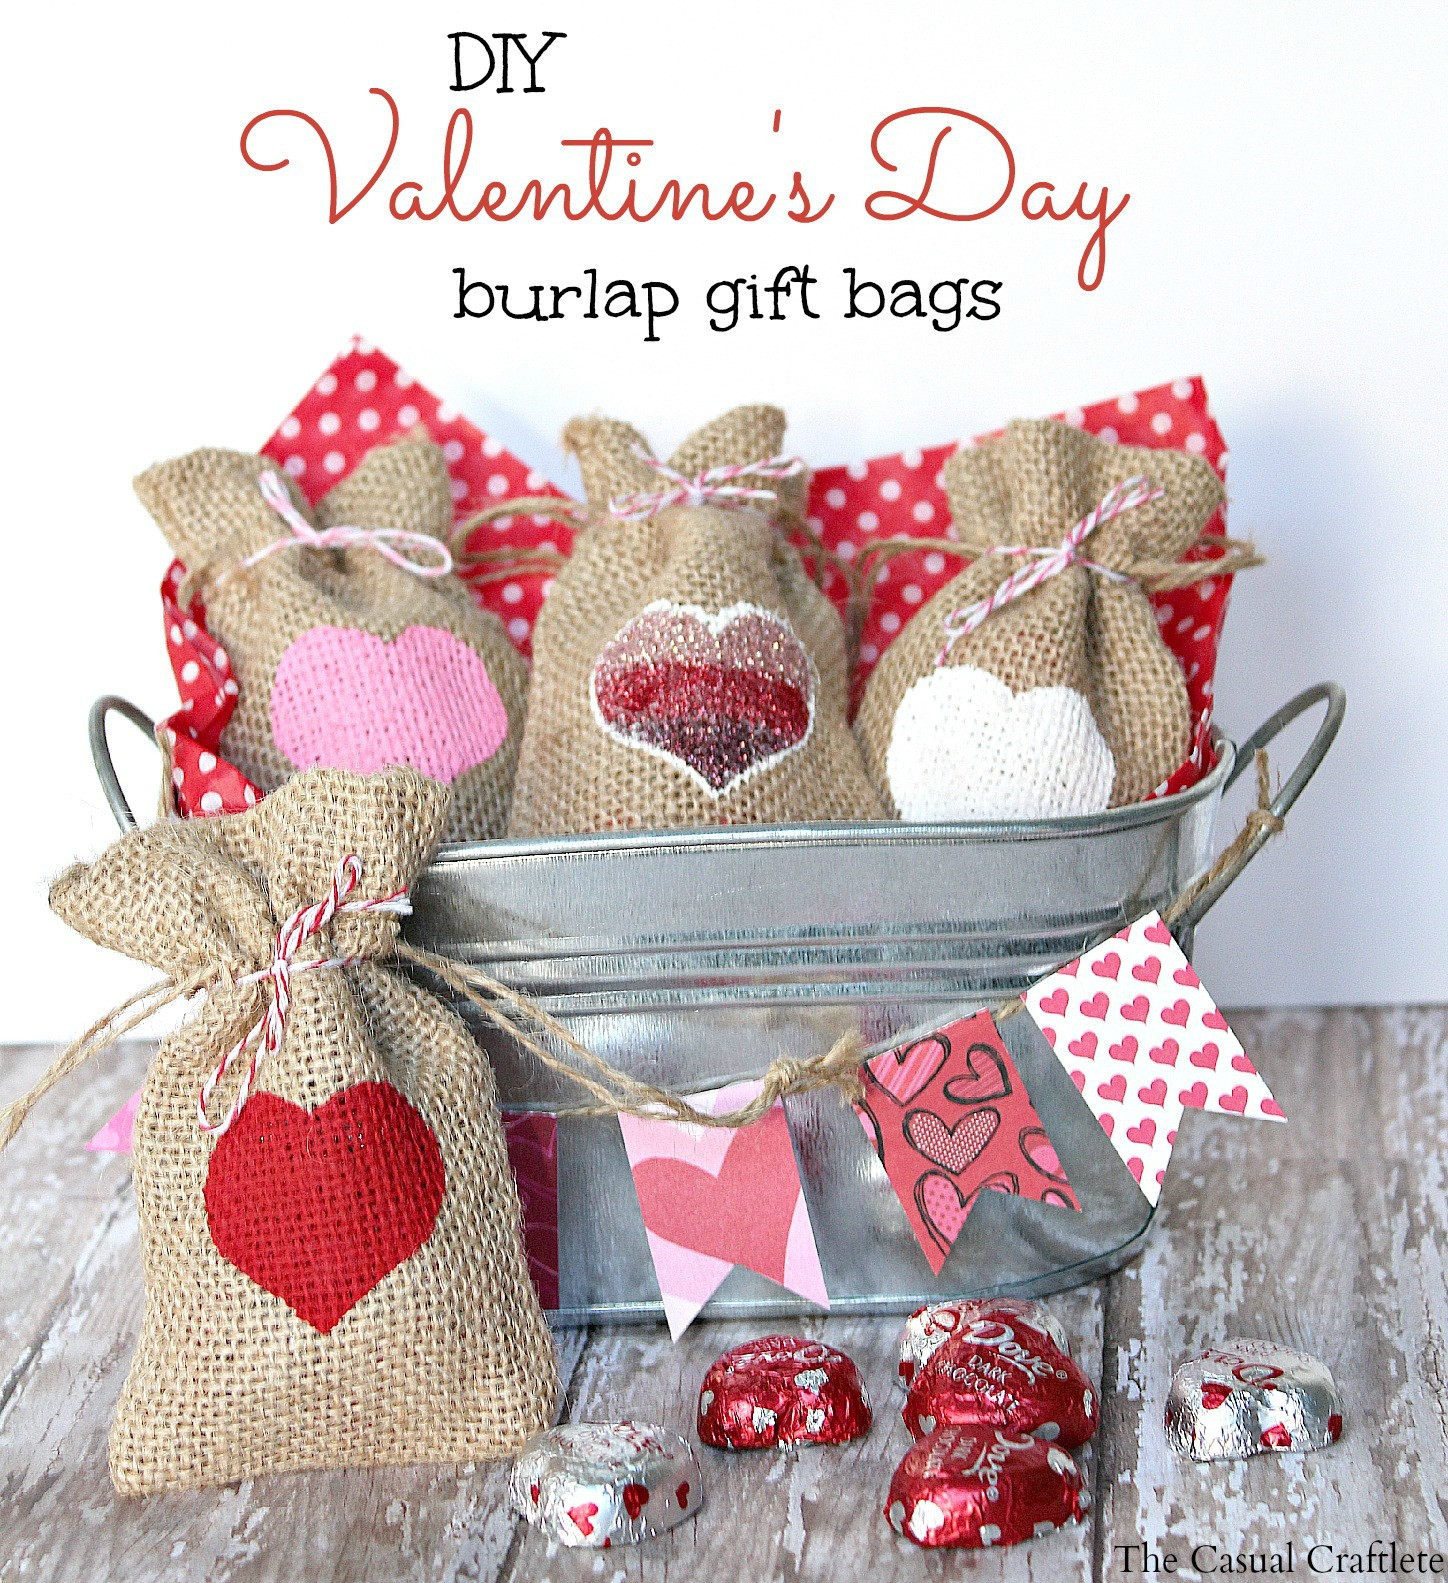 Diy Valentines Gift Ideas For Him
 DIY Valentine s Day Burlap Gift Bags